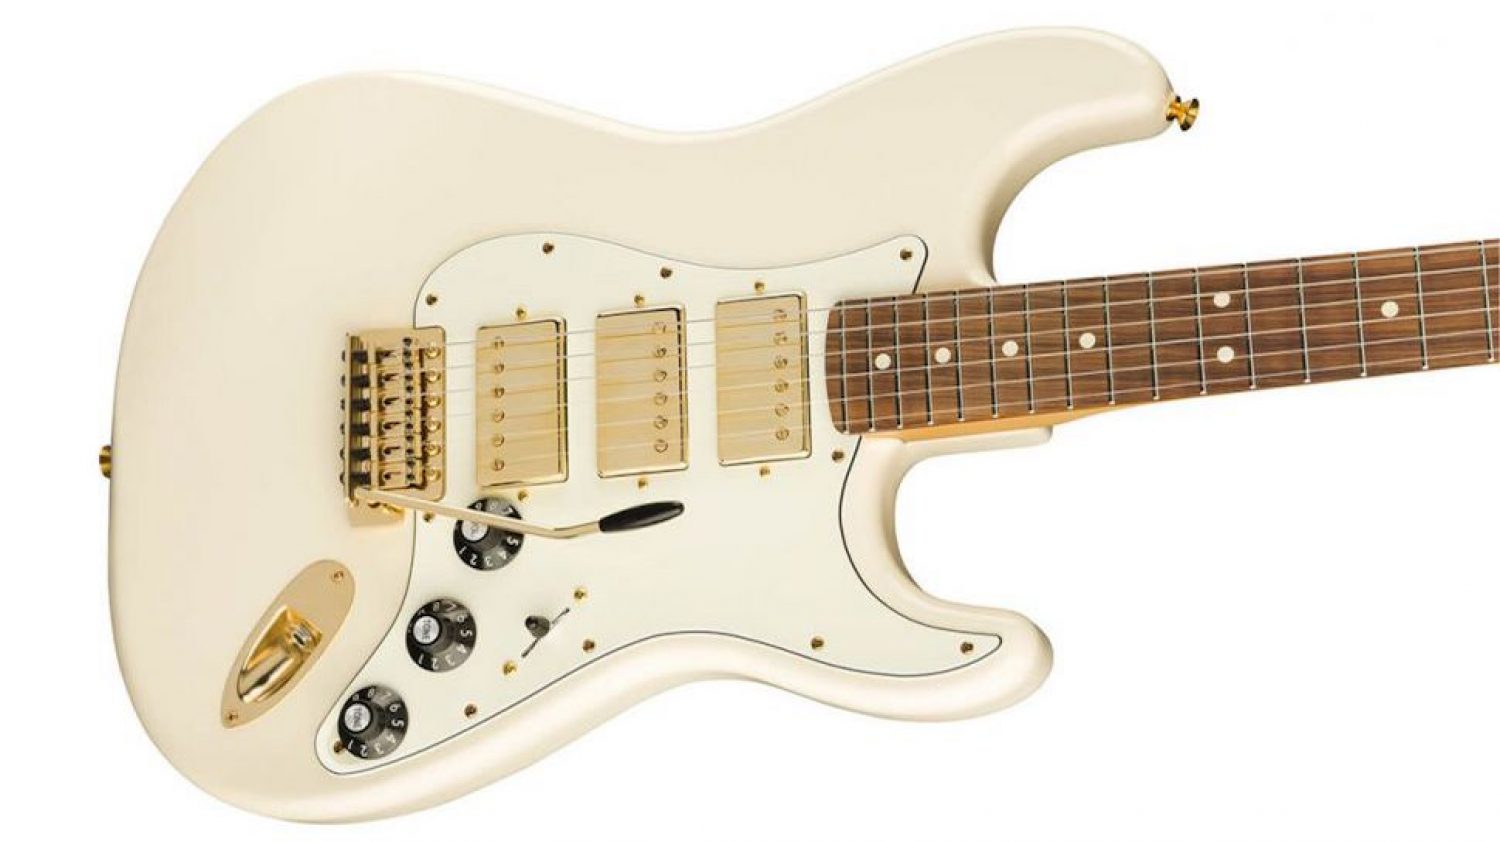 Fender Has a New Blacktop Stratocaster Model With Three Humbuckers